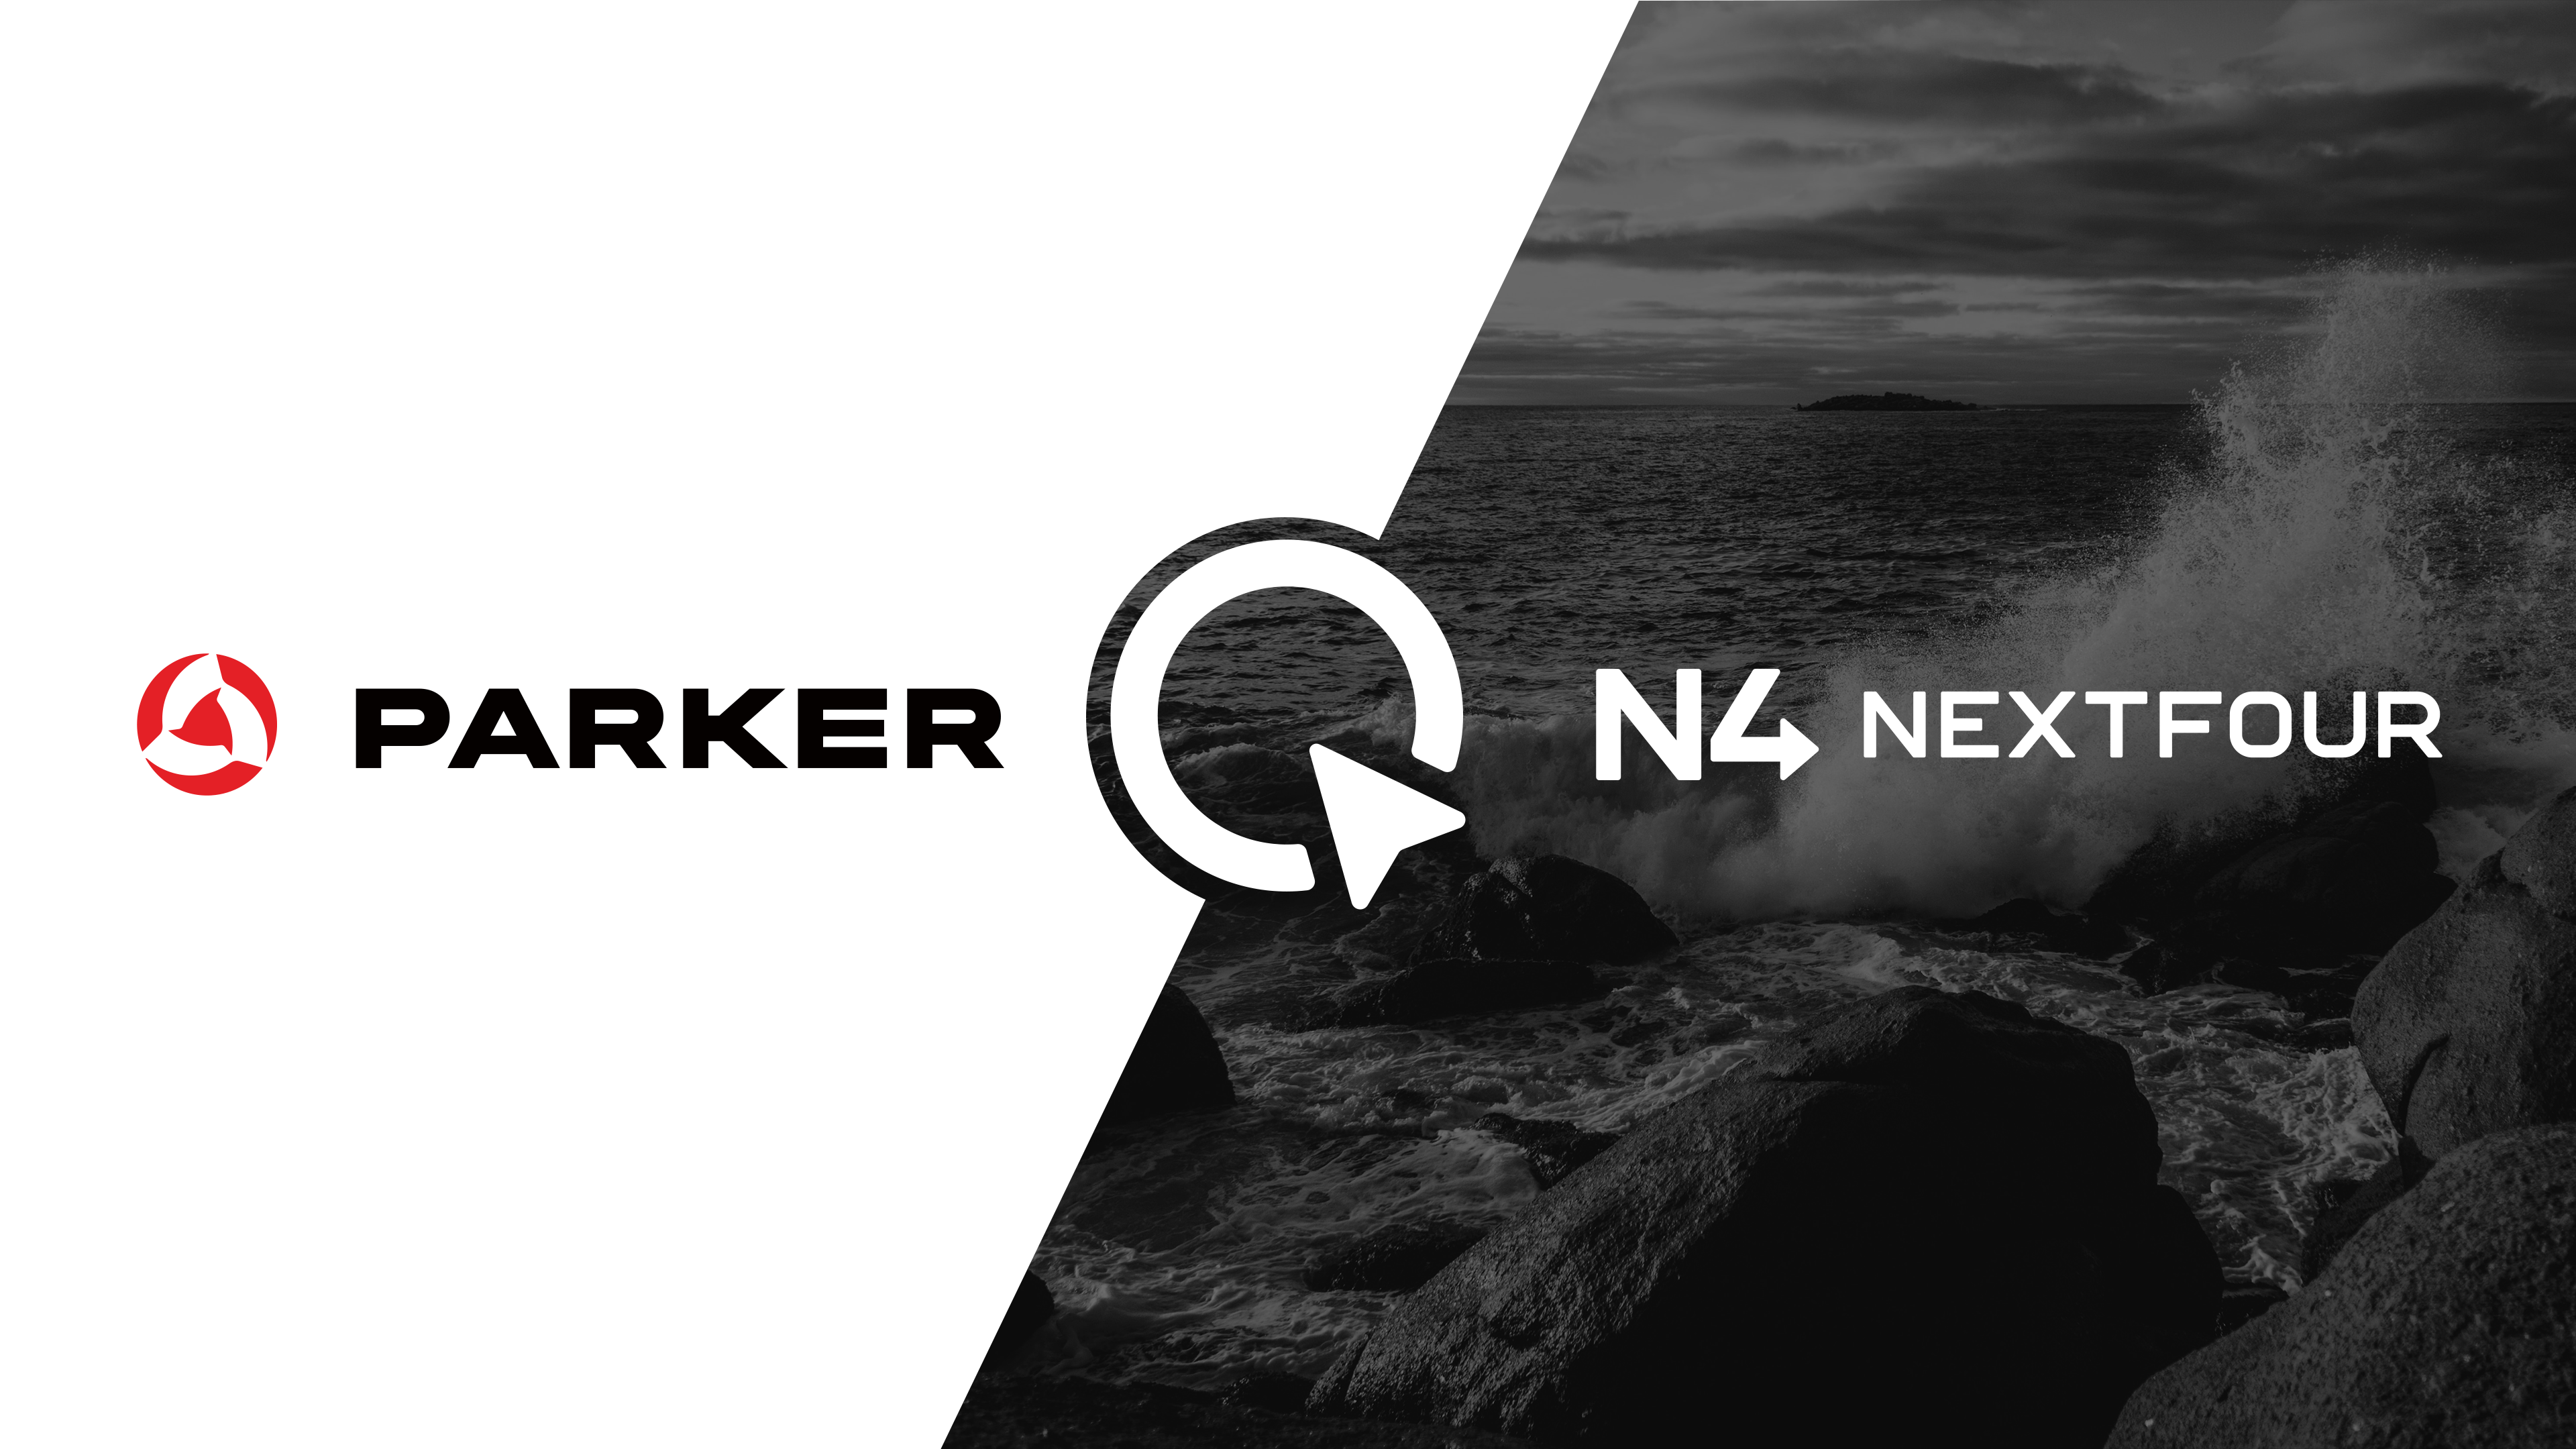 Parker Poland and Q Experience by Nextfour Solutions Ltd  announces a Distribution agreement for Poland for 2023 onwards.